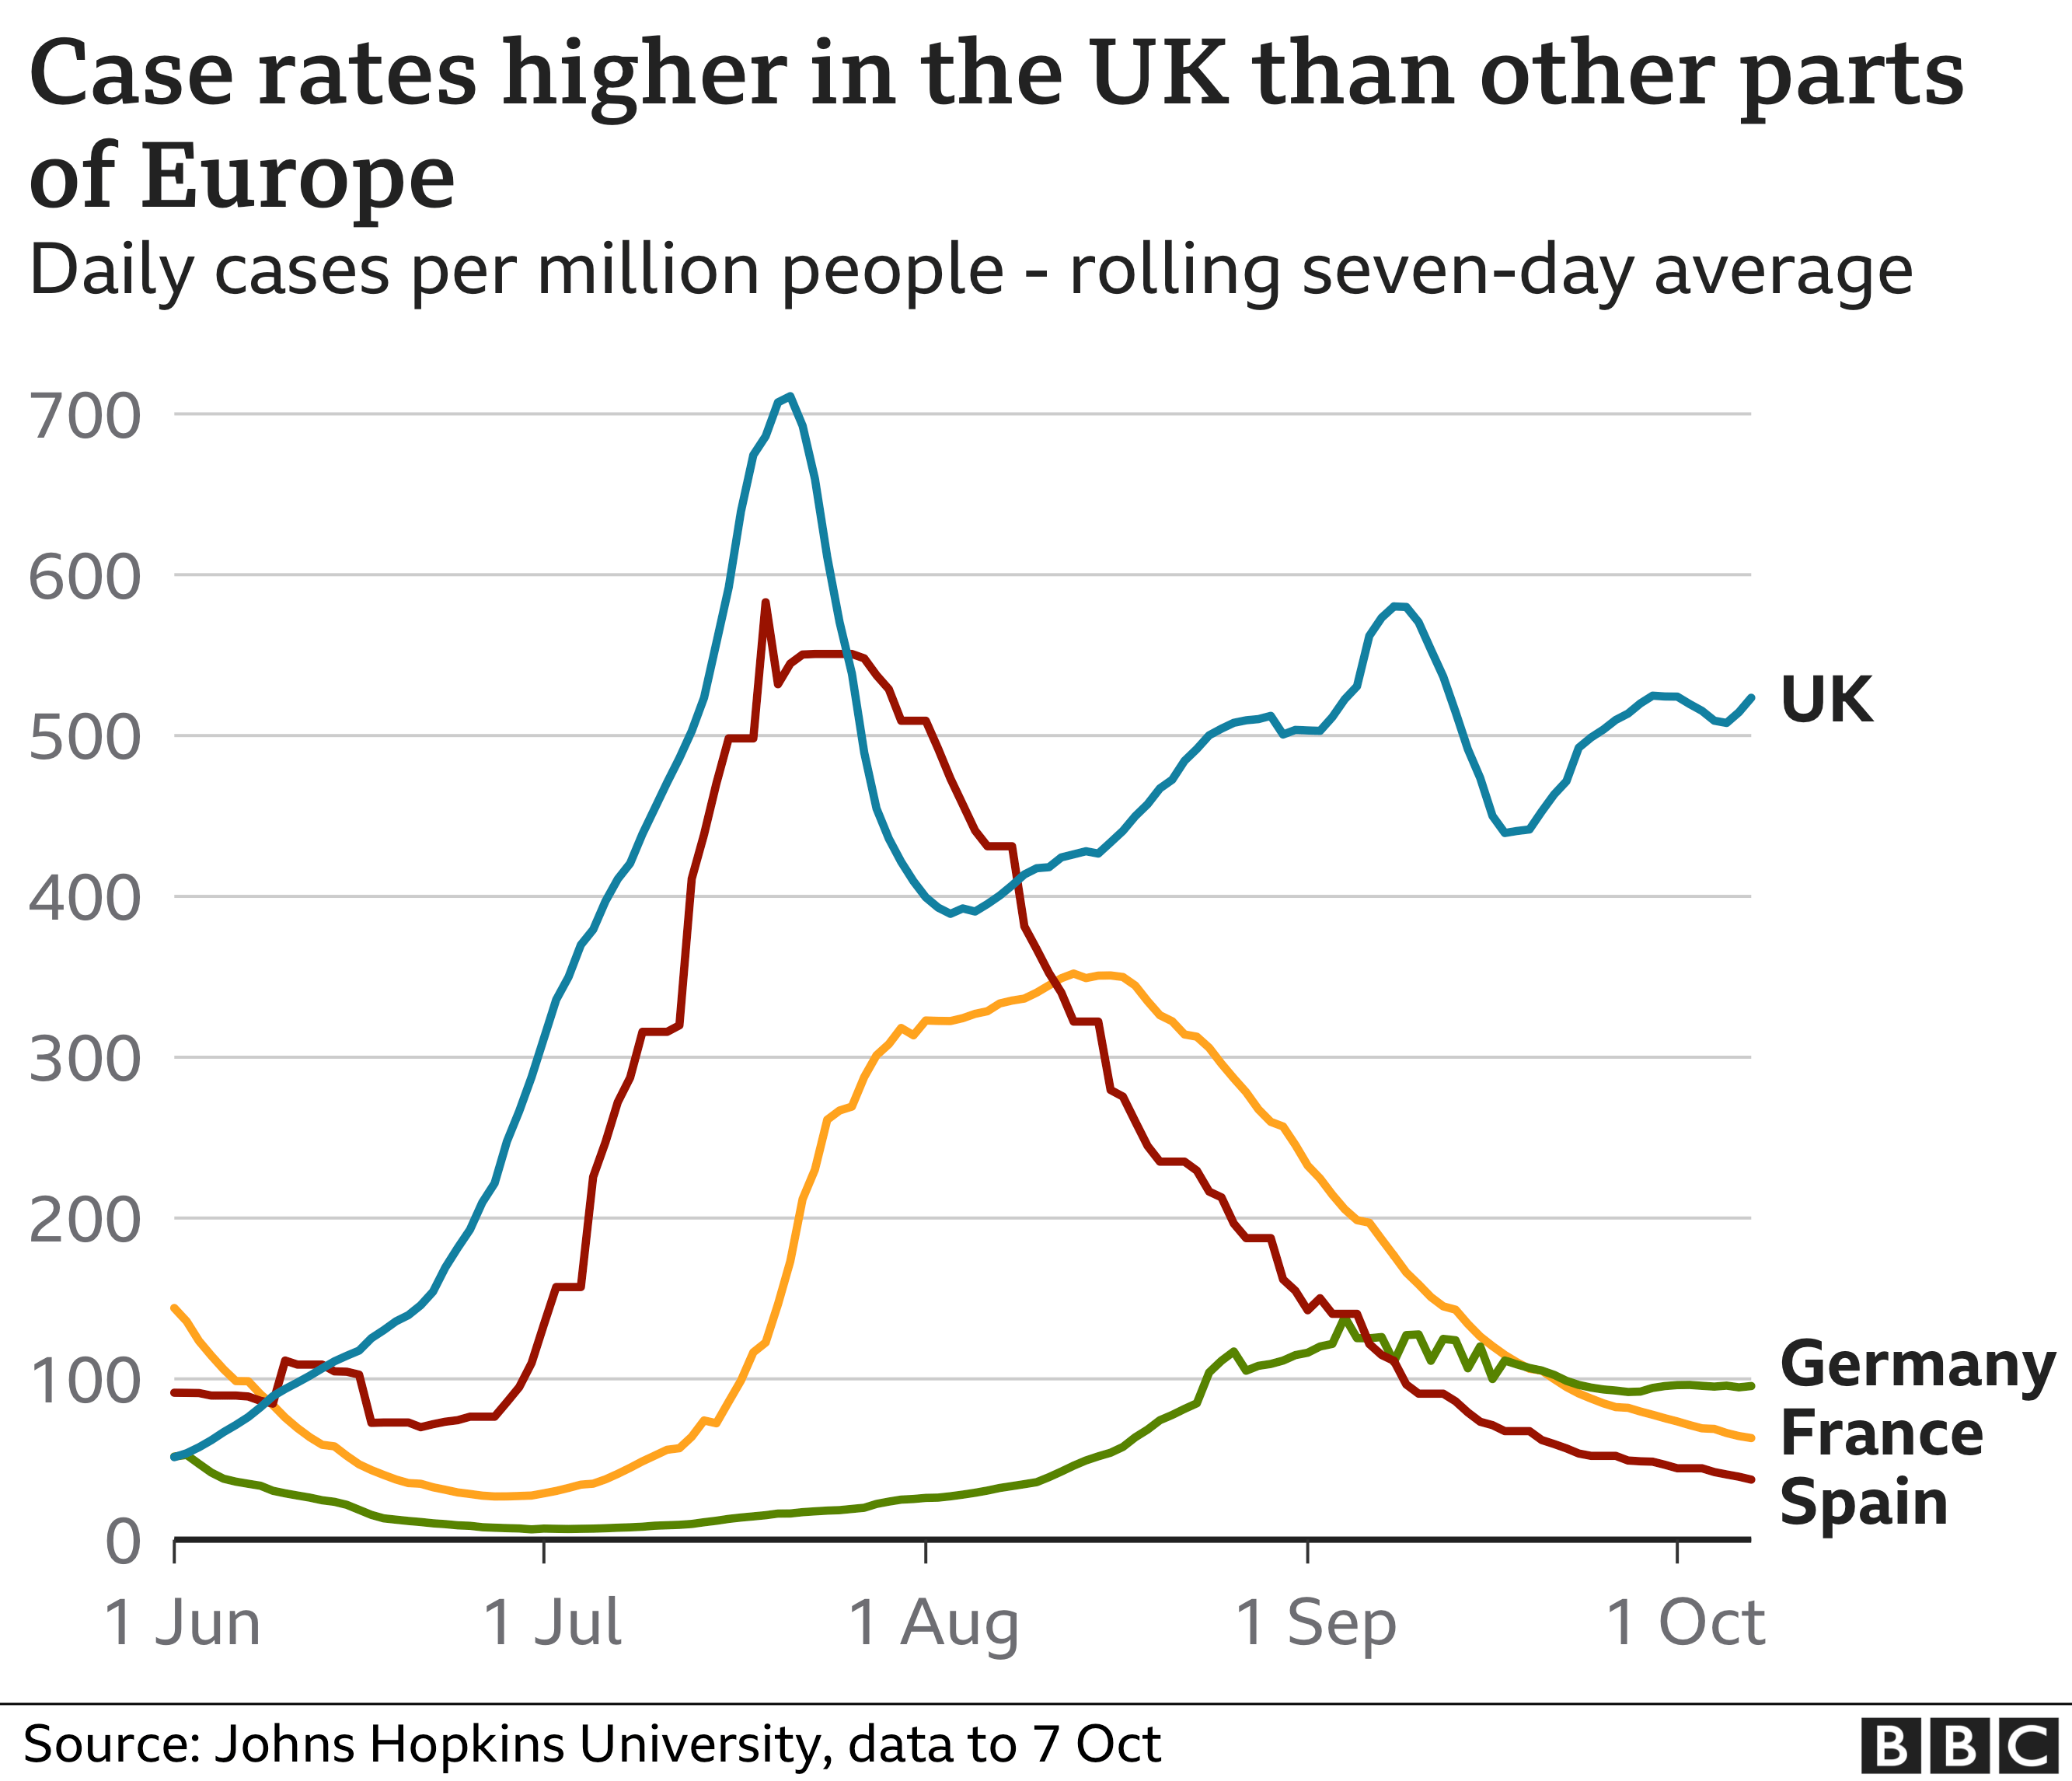 JHU Case rates higher in UK than other parts of Europe 7-10-2021